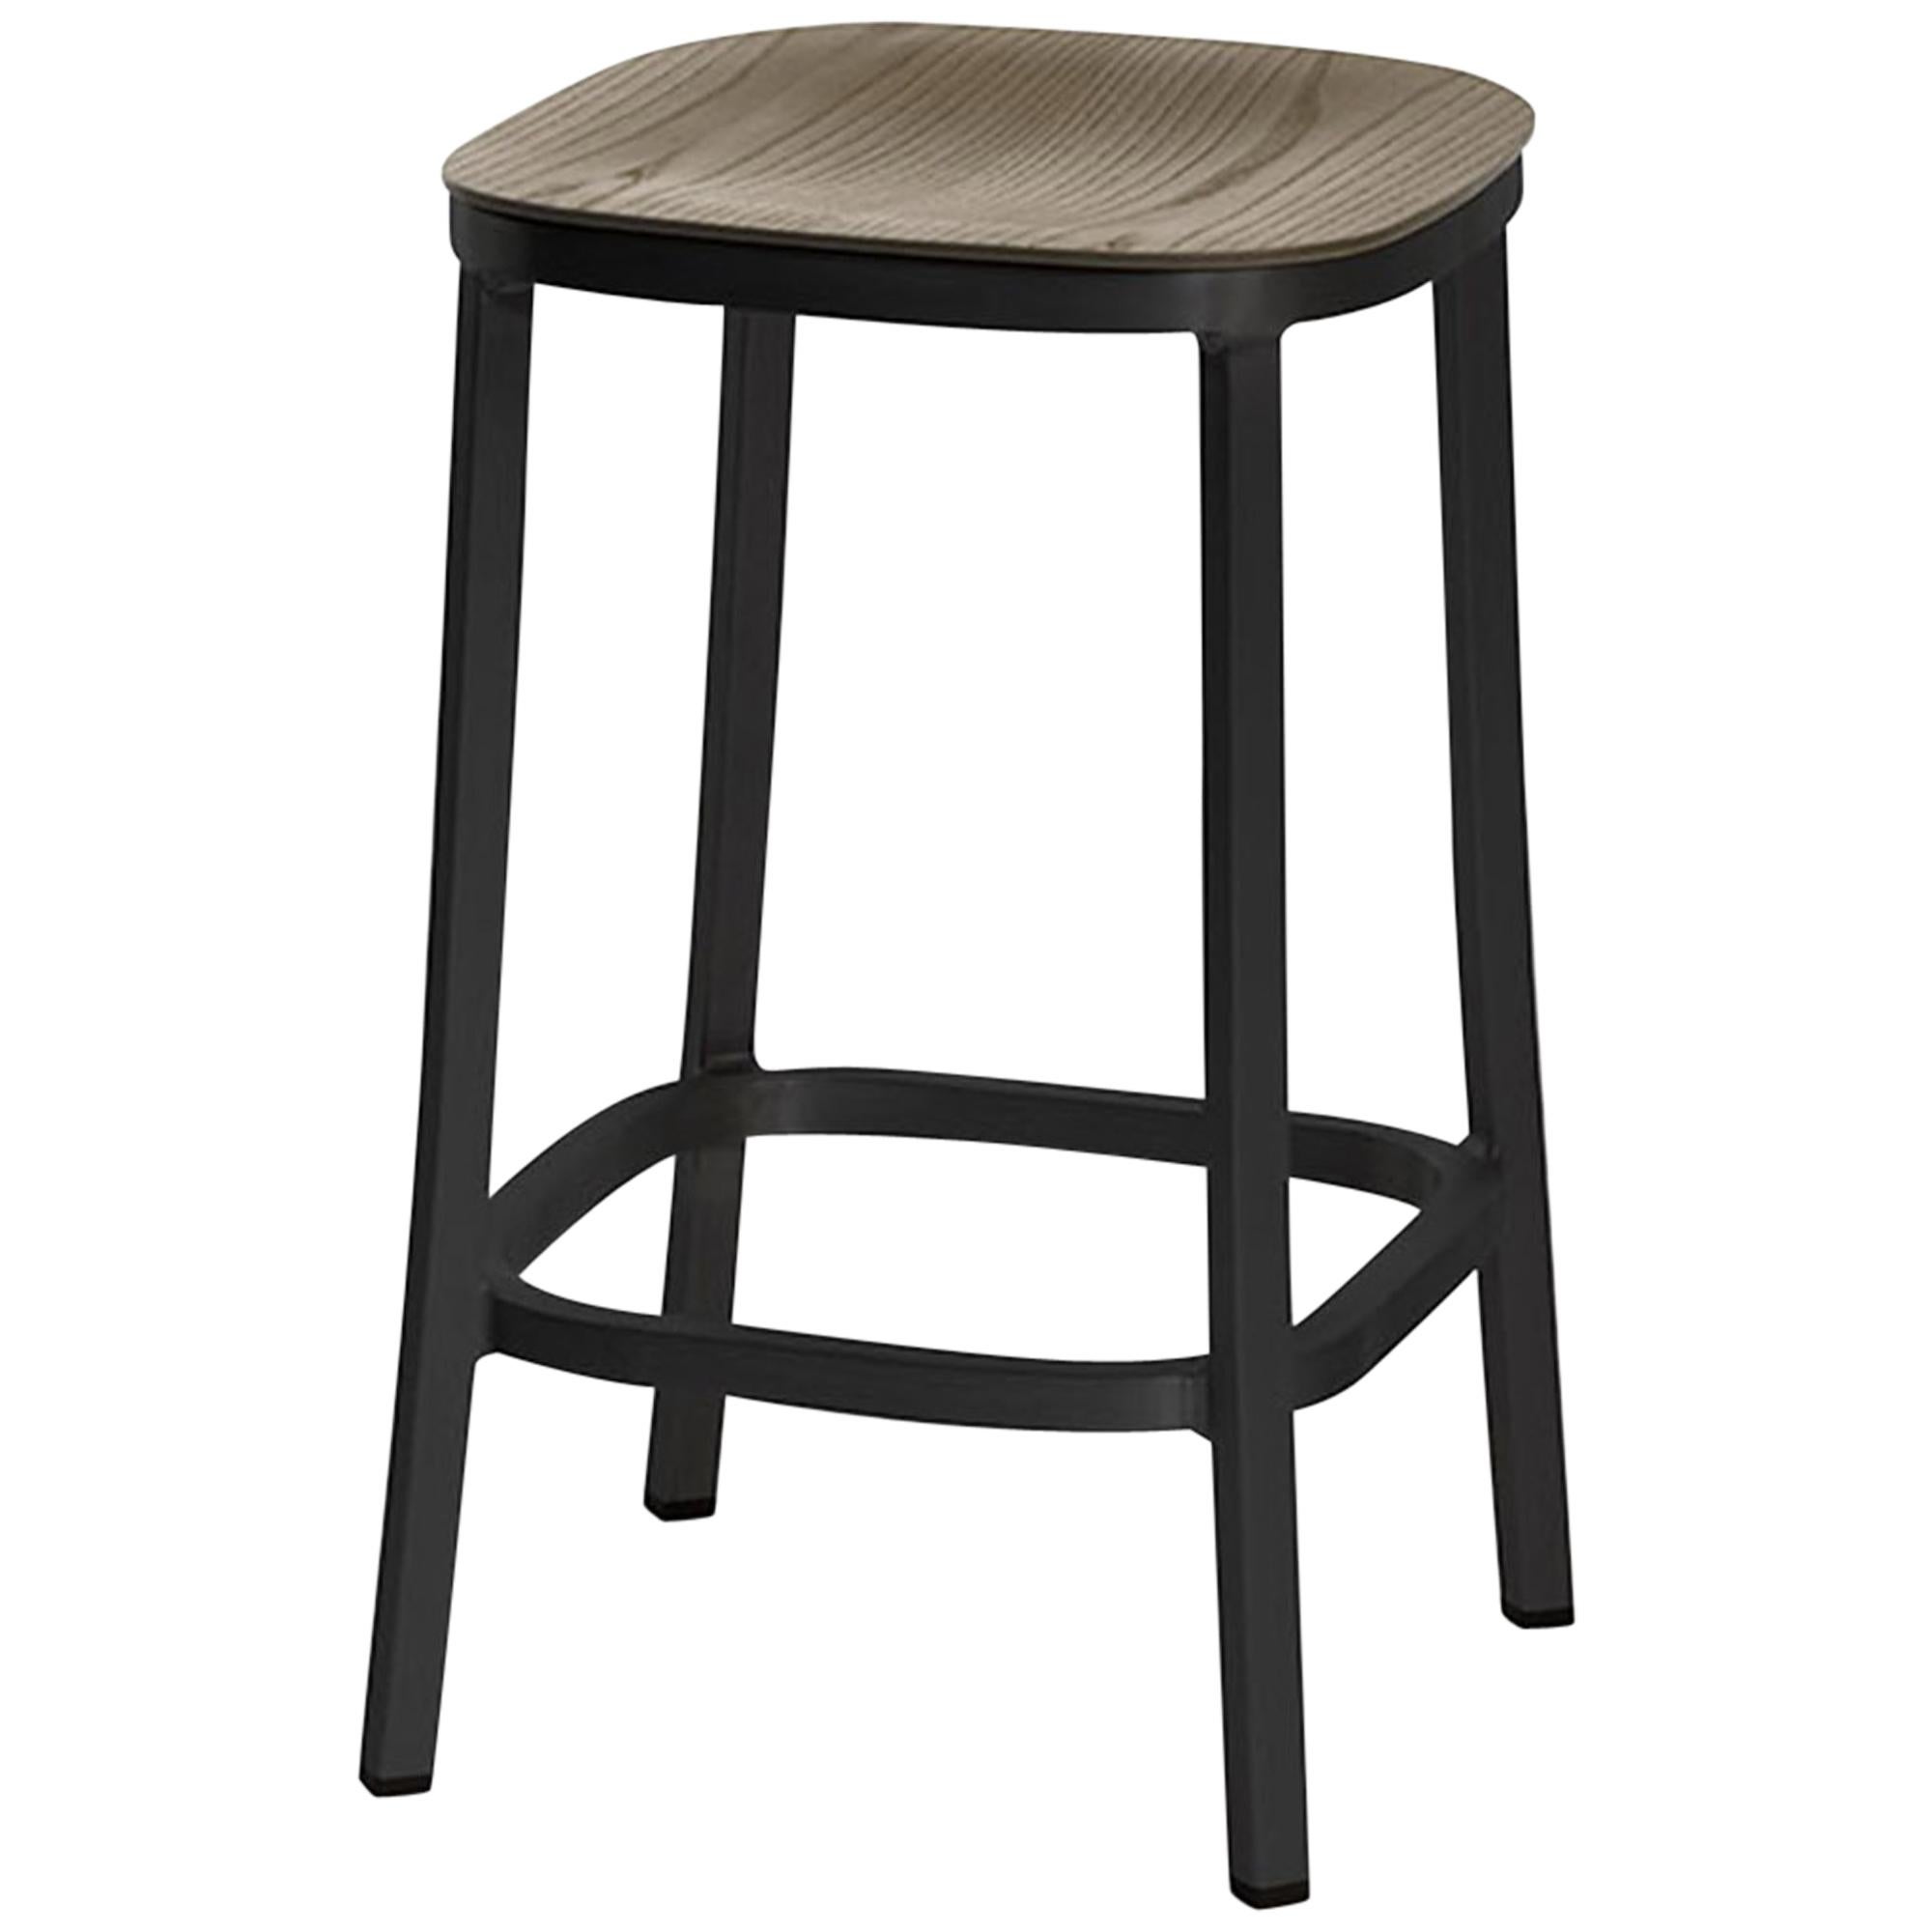 Emeco 1 Inch Counter Stool in Dark Aluminum and Walnut by Jasper Morrison For Sale